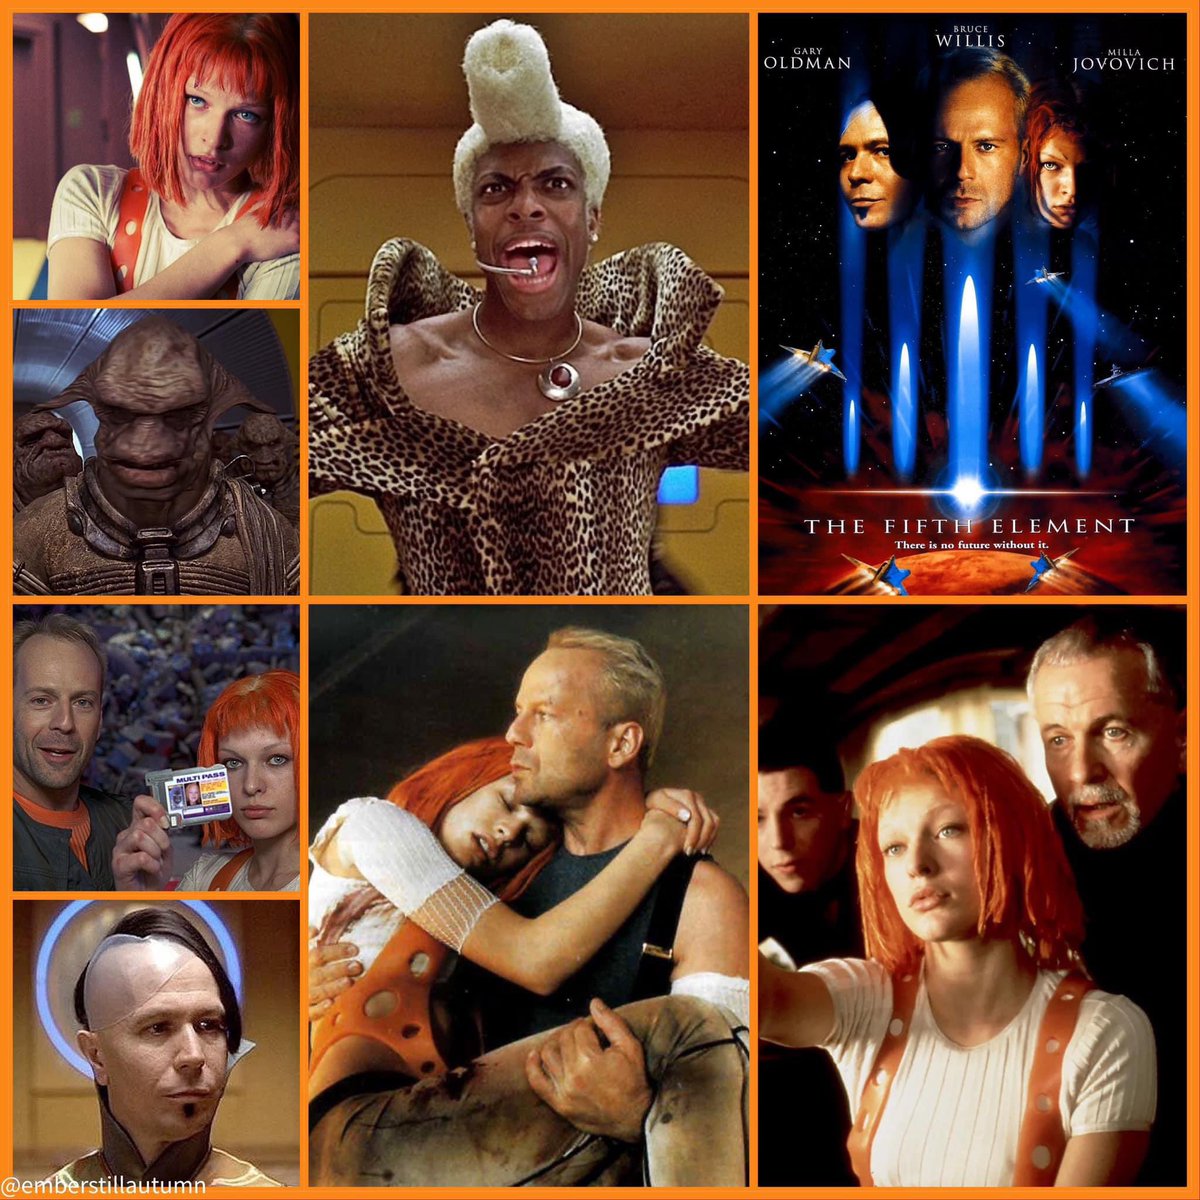 On this day back in 1997, this sci-fi film premiered at the Cannes Film Festival in France..

Happy Anniversary to The Fifth Element!

“You no trouble. Me, Fifth Element. Supreme being. Me protect you.”

- Leeloo

#thefifthelement #millajovovich #brucewillis